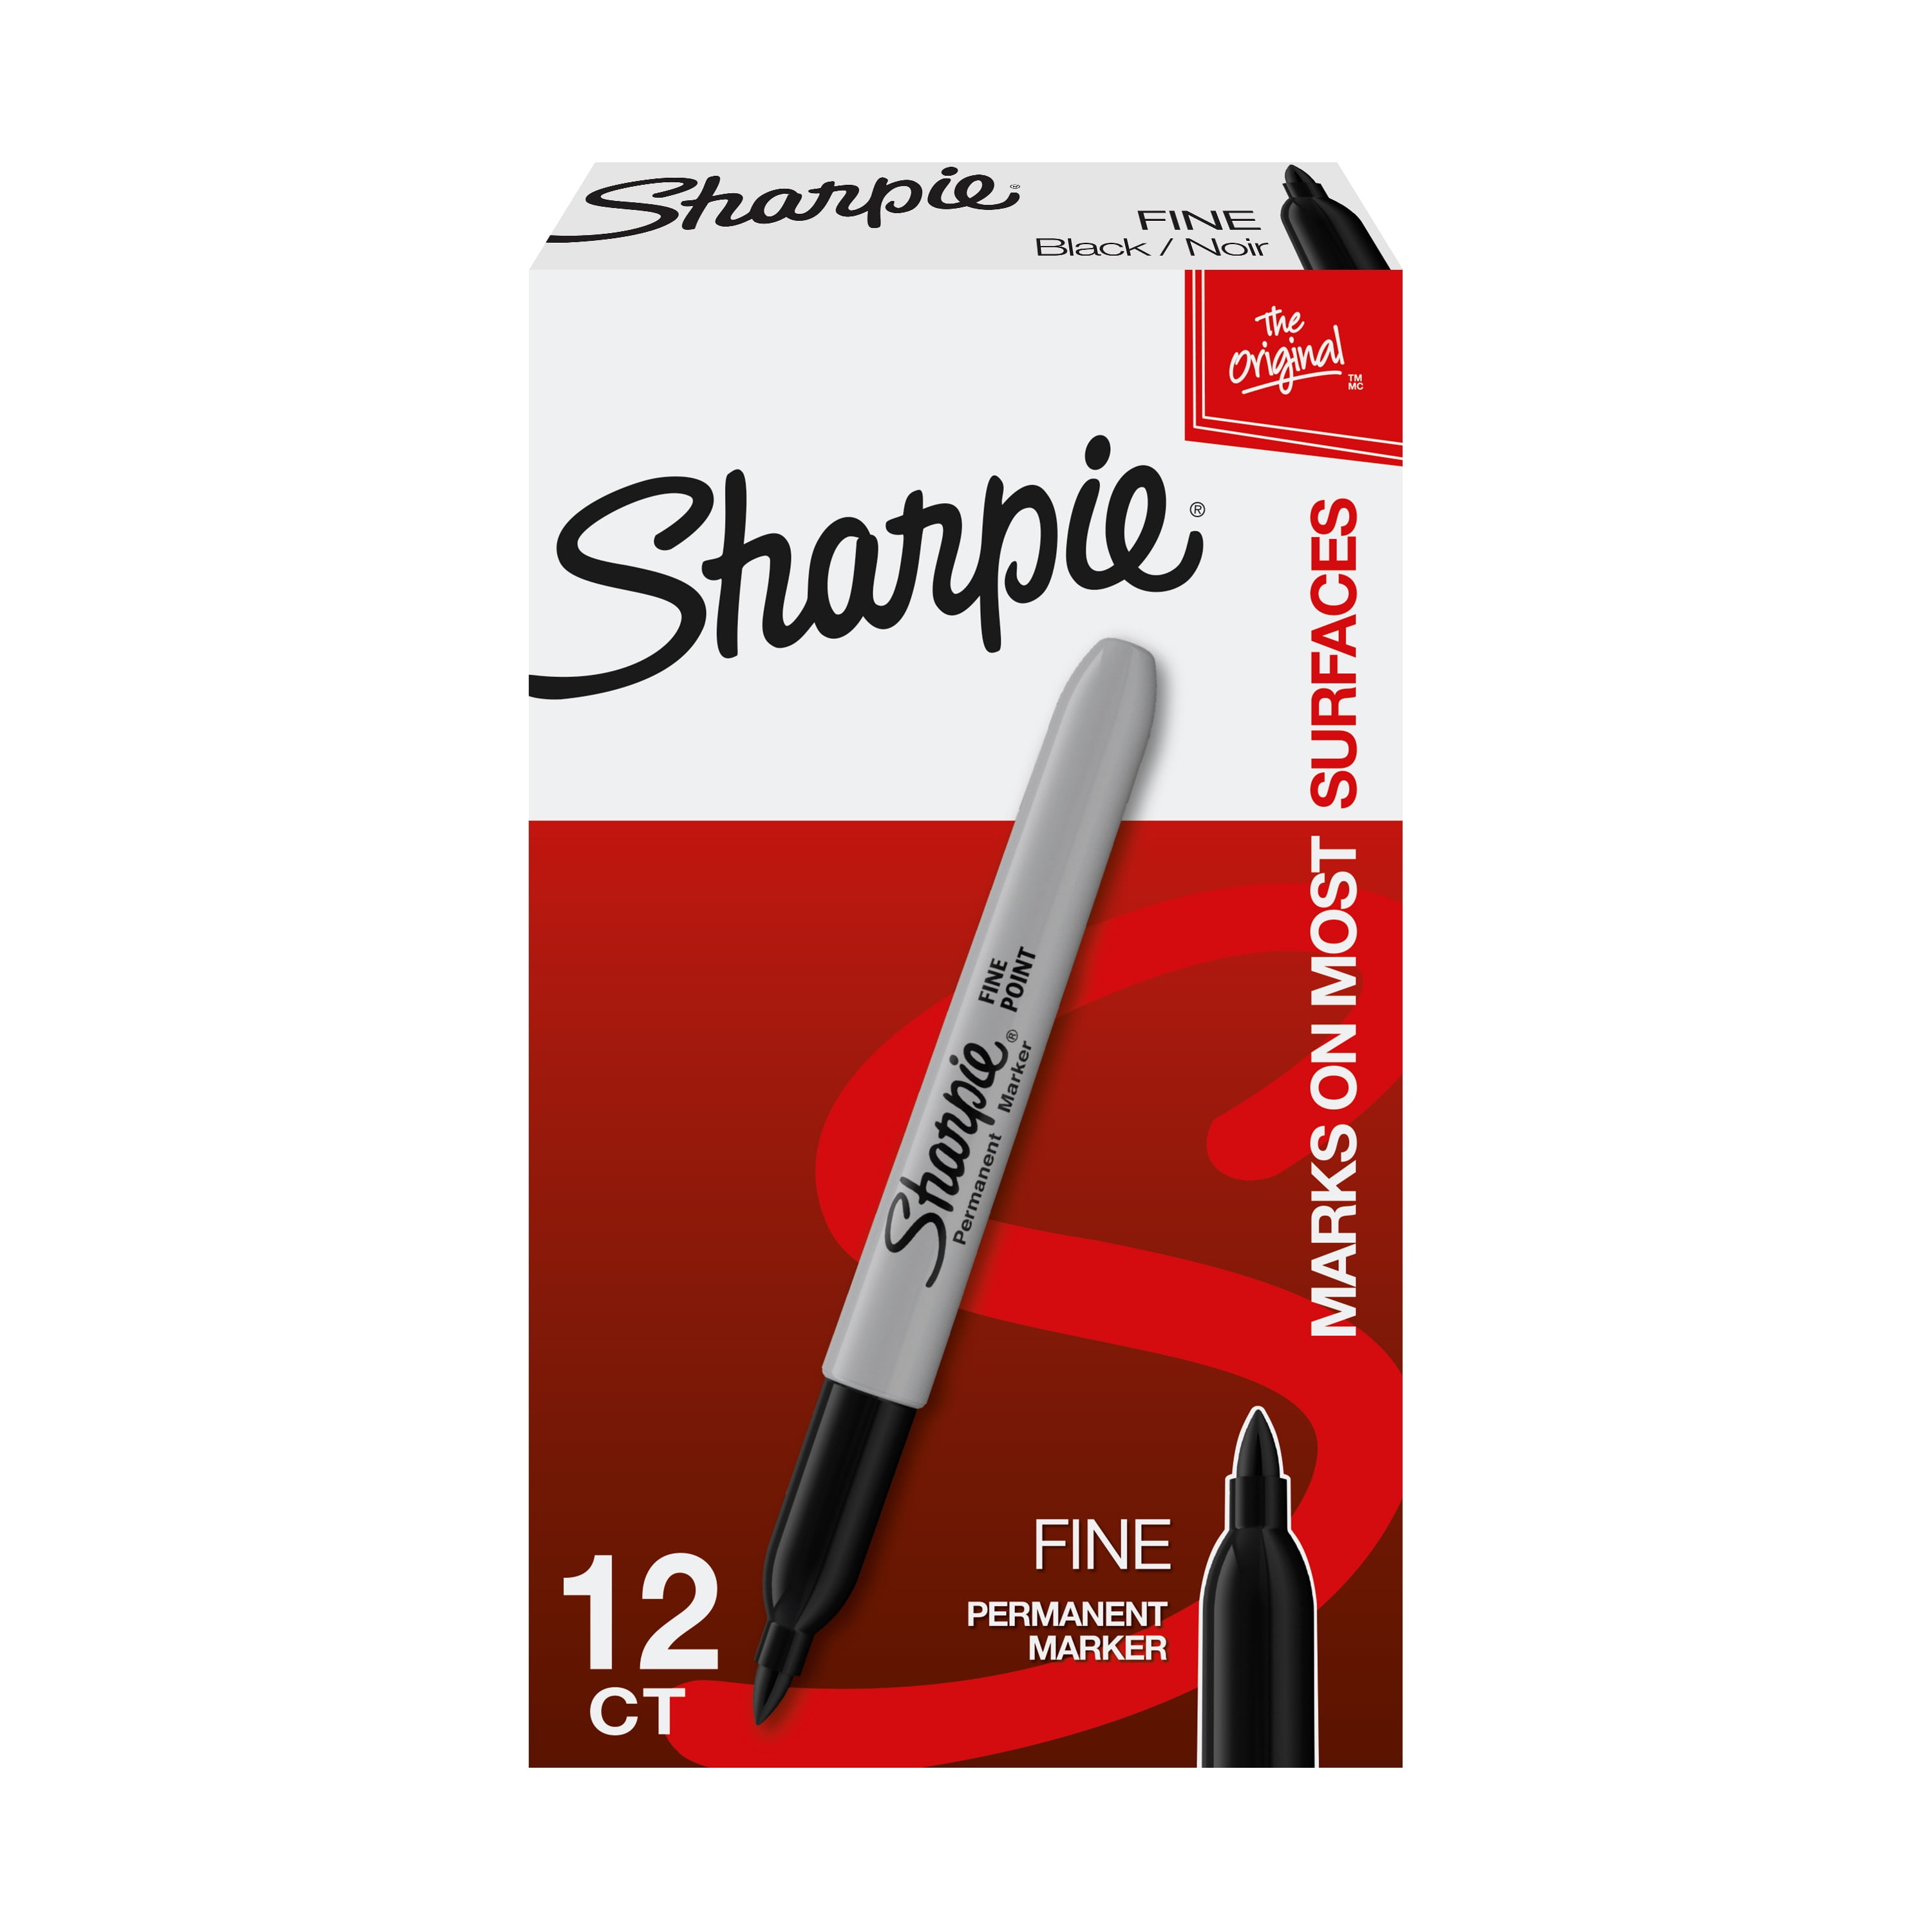 Blue or Red 3 x SHARPIE Permanent FINE TIP Marker Pens Colour Choice From Black 